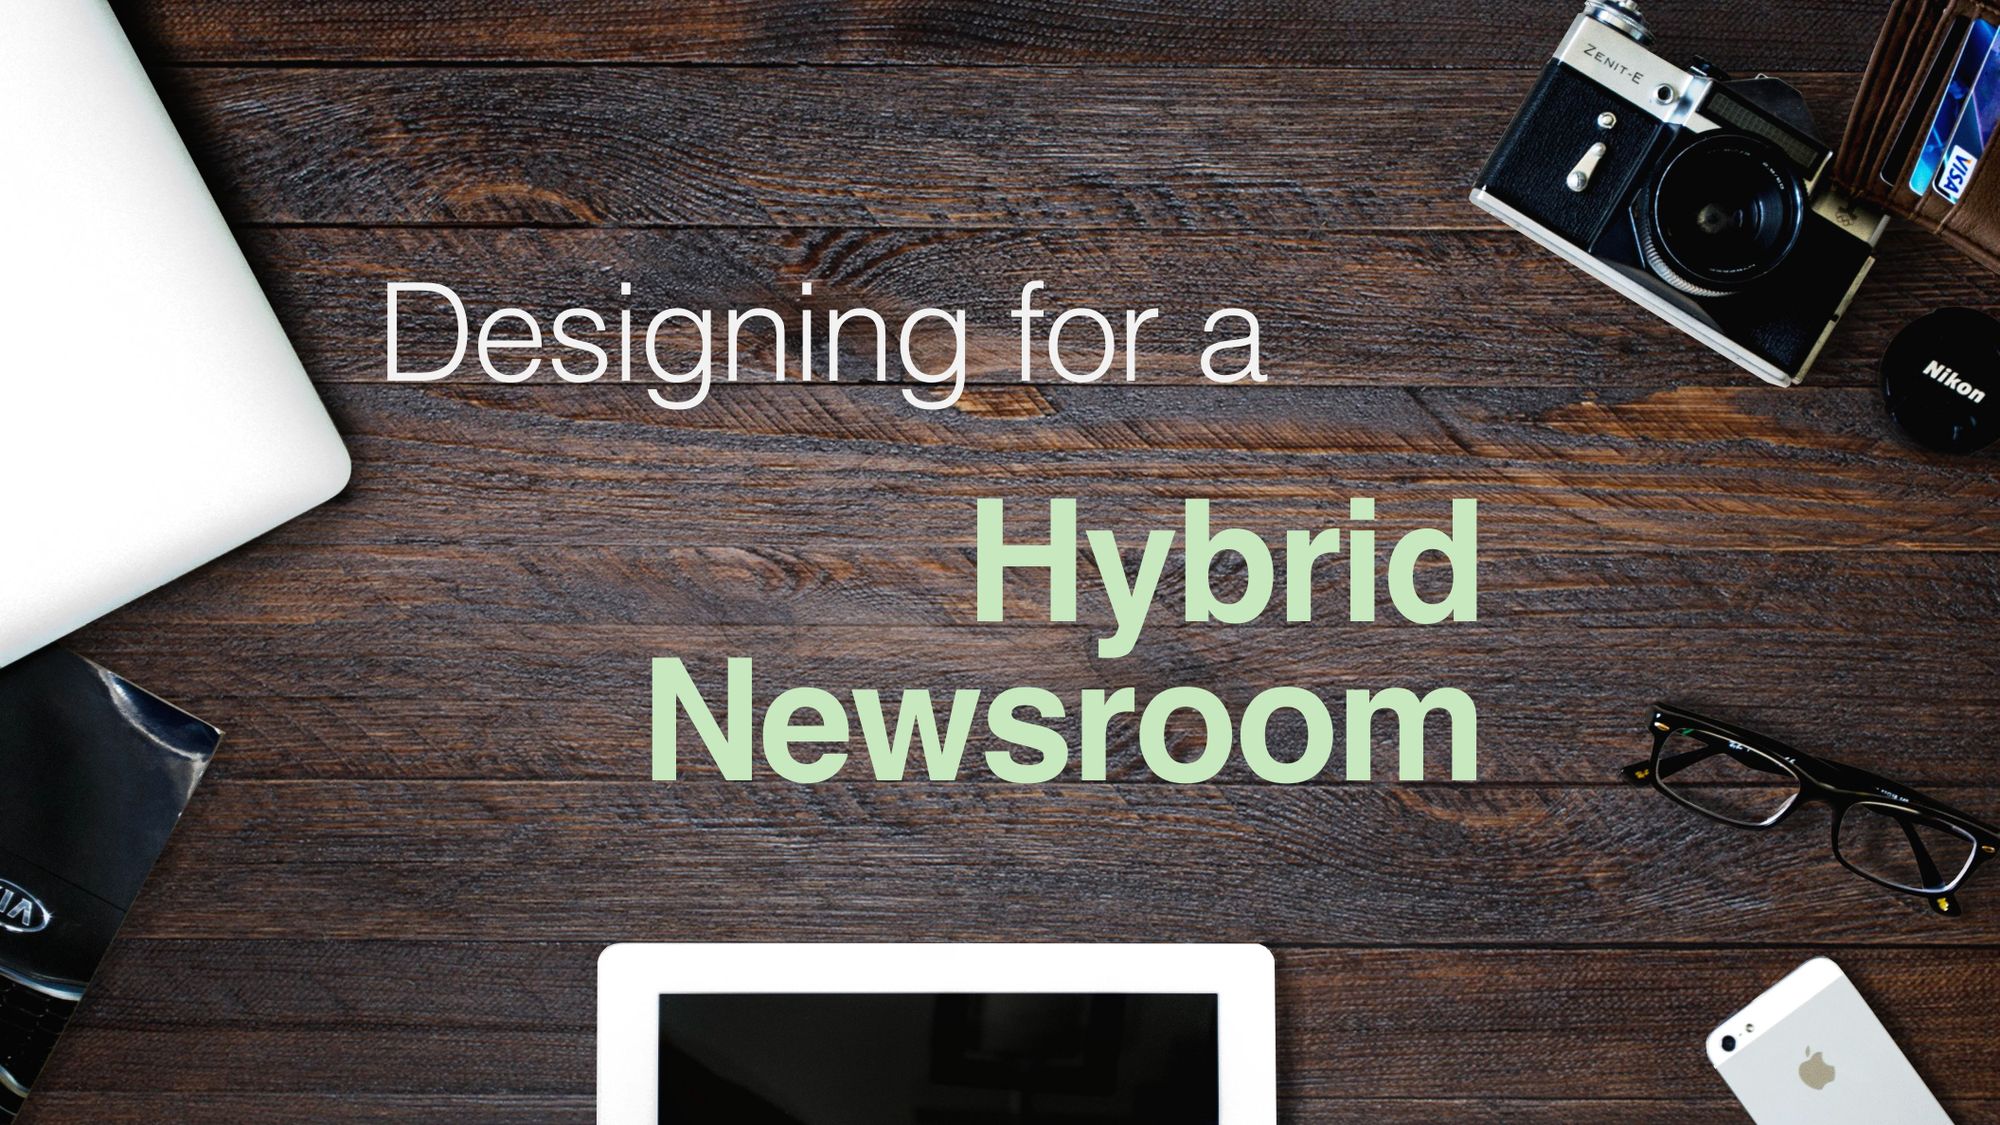 What should your newsroom look like in the era of hybrid working?